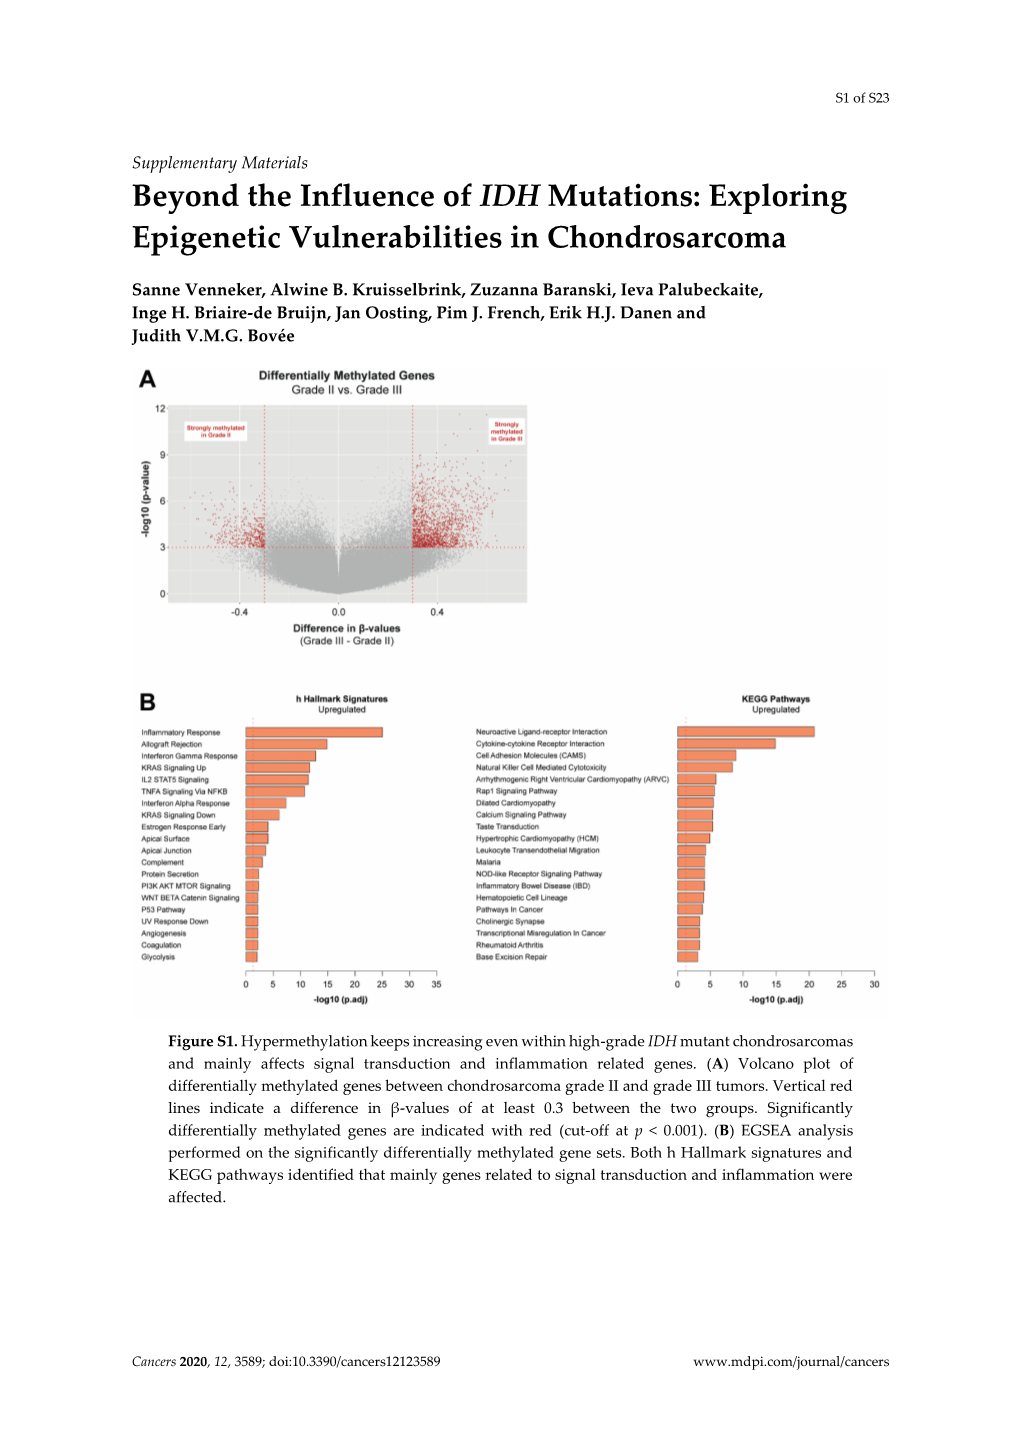 Beyond the Influence of IDH Mutations: Exploring Epigenetic Vulnerabilities in Chondrosarcoma